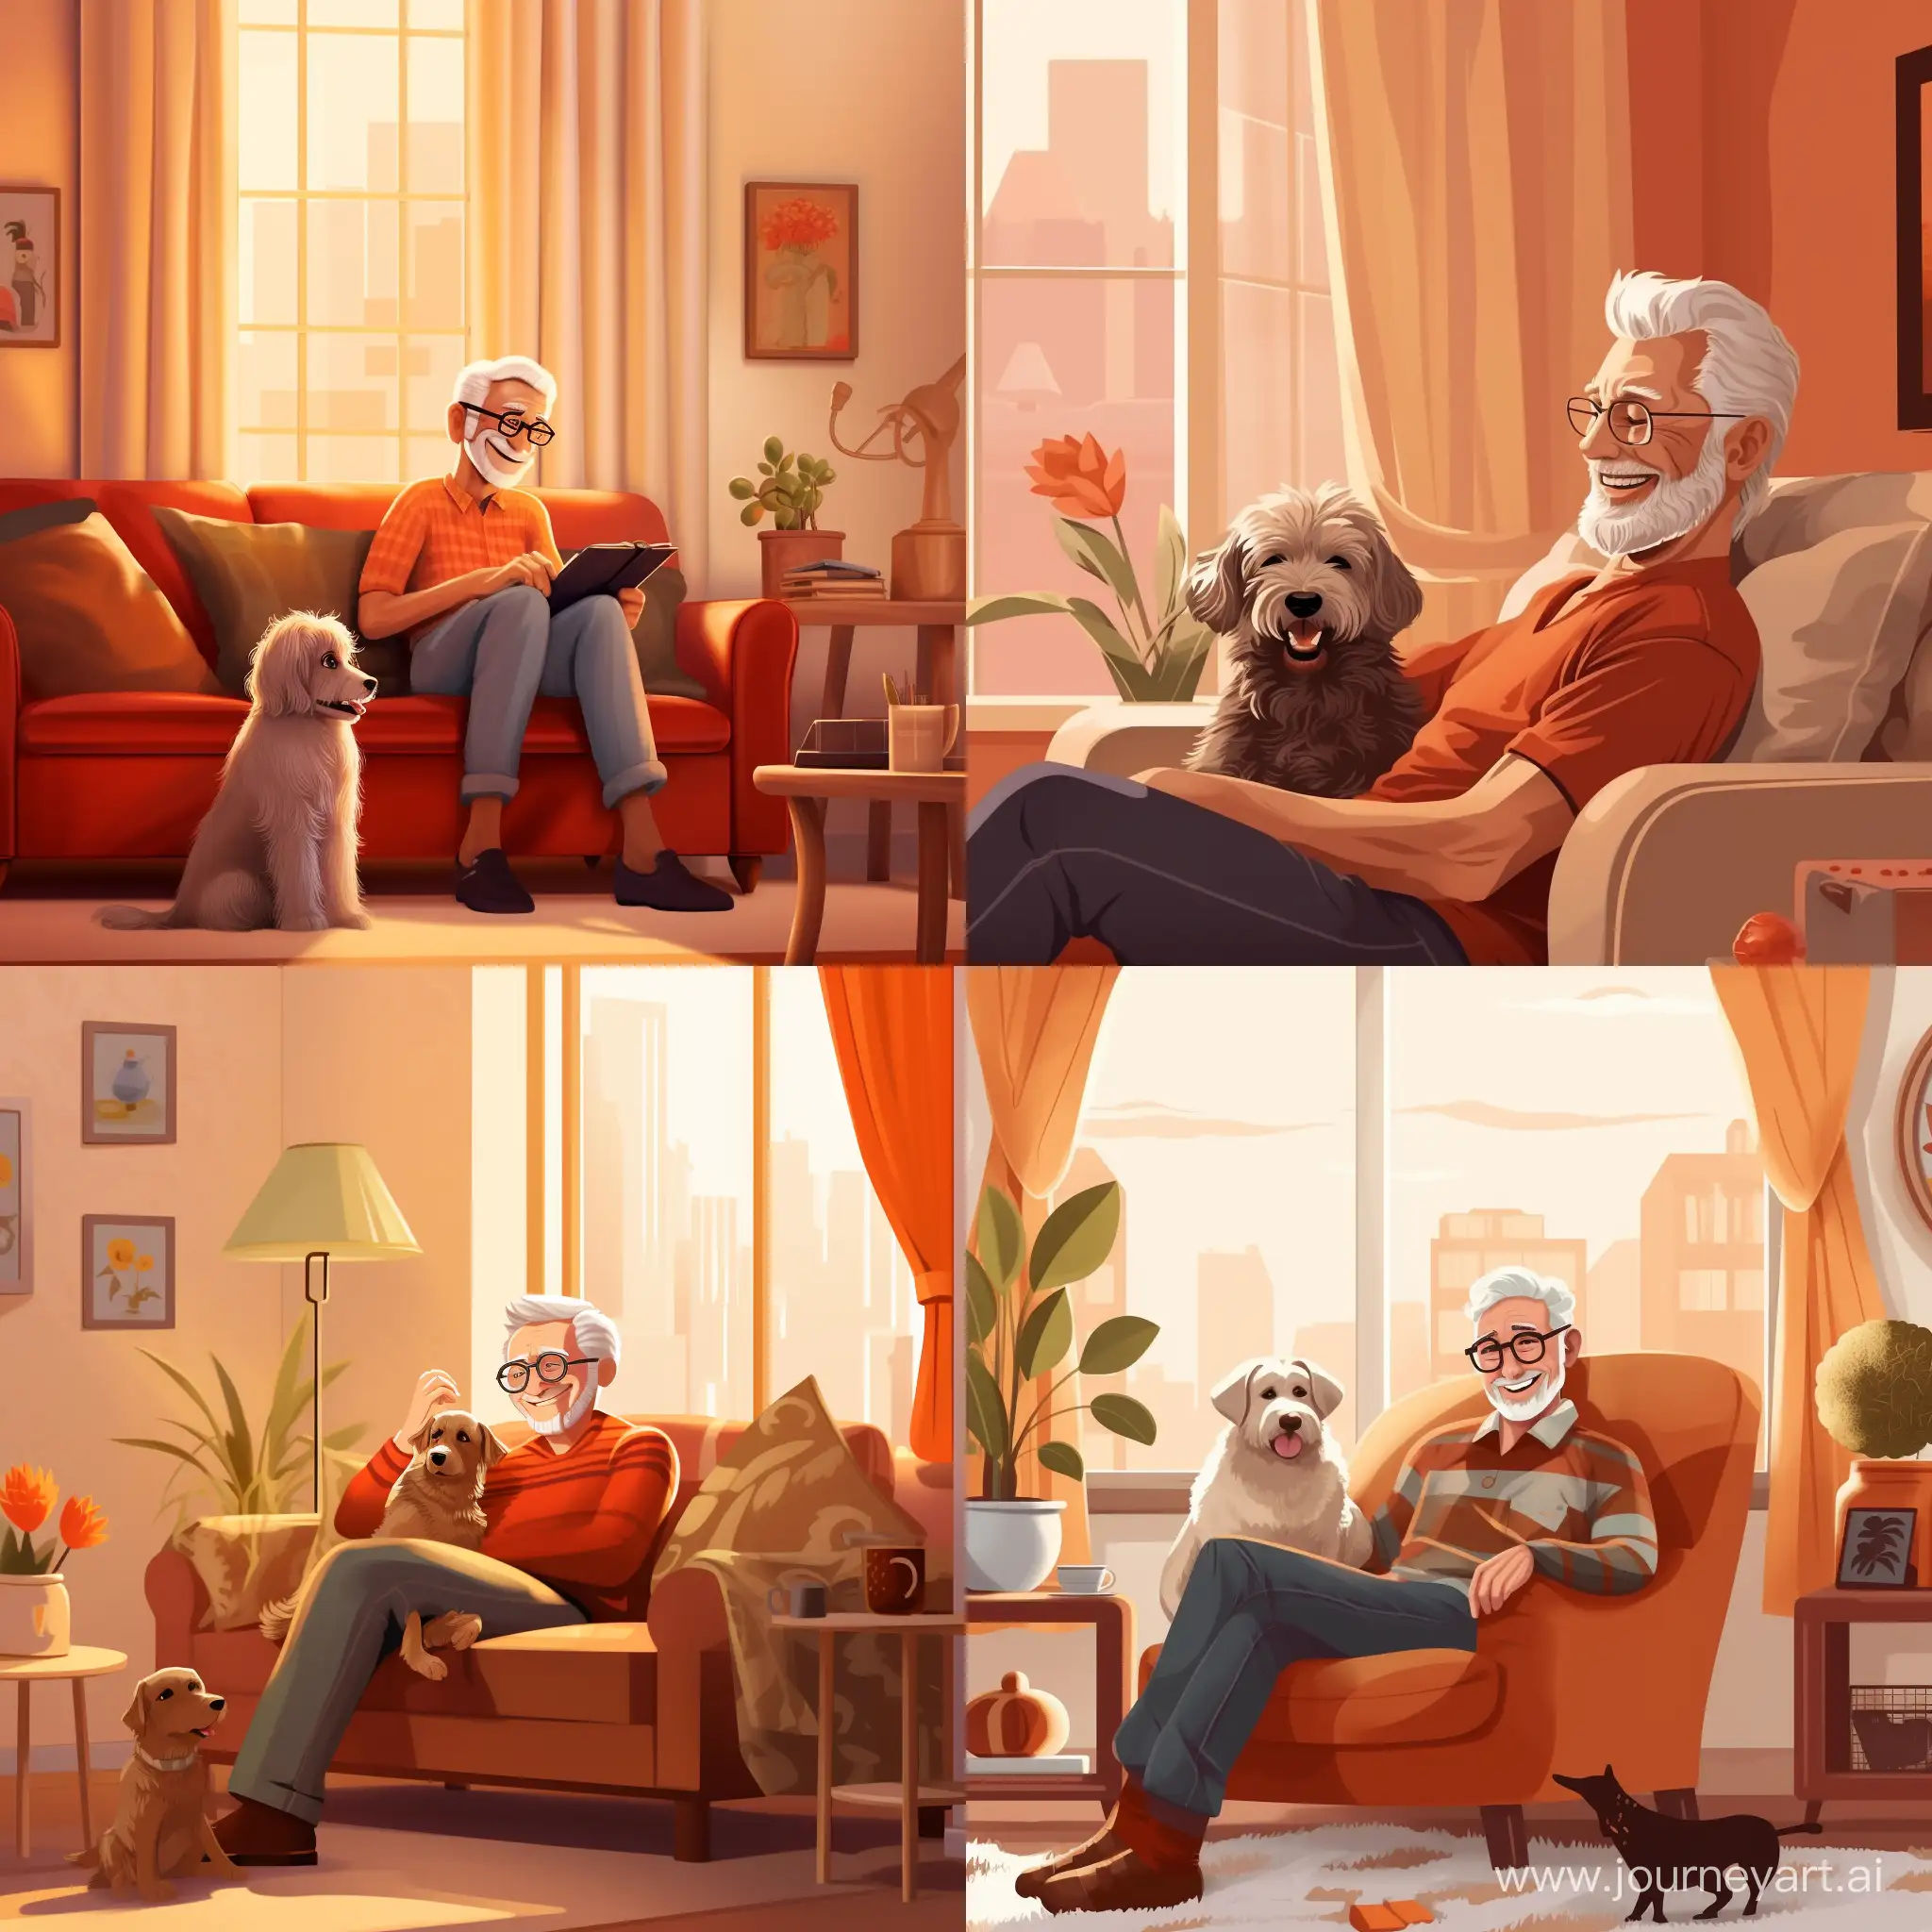 Joyful-Grandpa-Relaxing-with-His-Beloved-Dog-in-a-Stylish-Modern-Living-Room